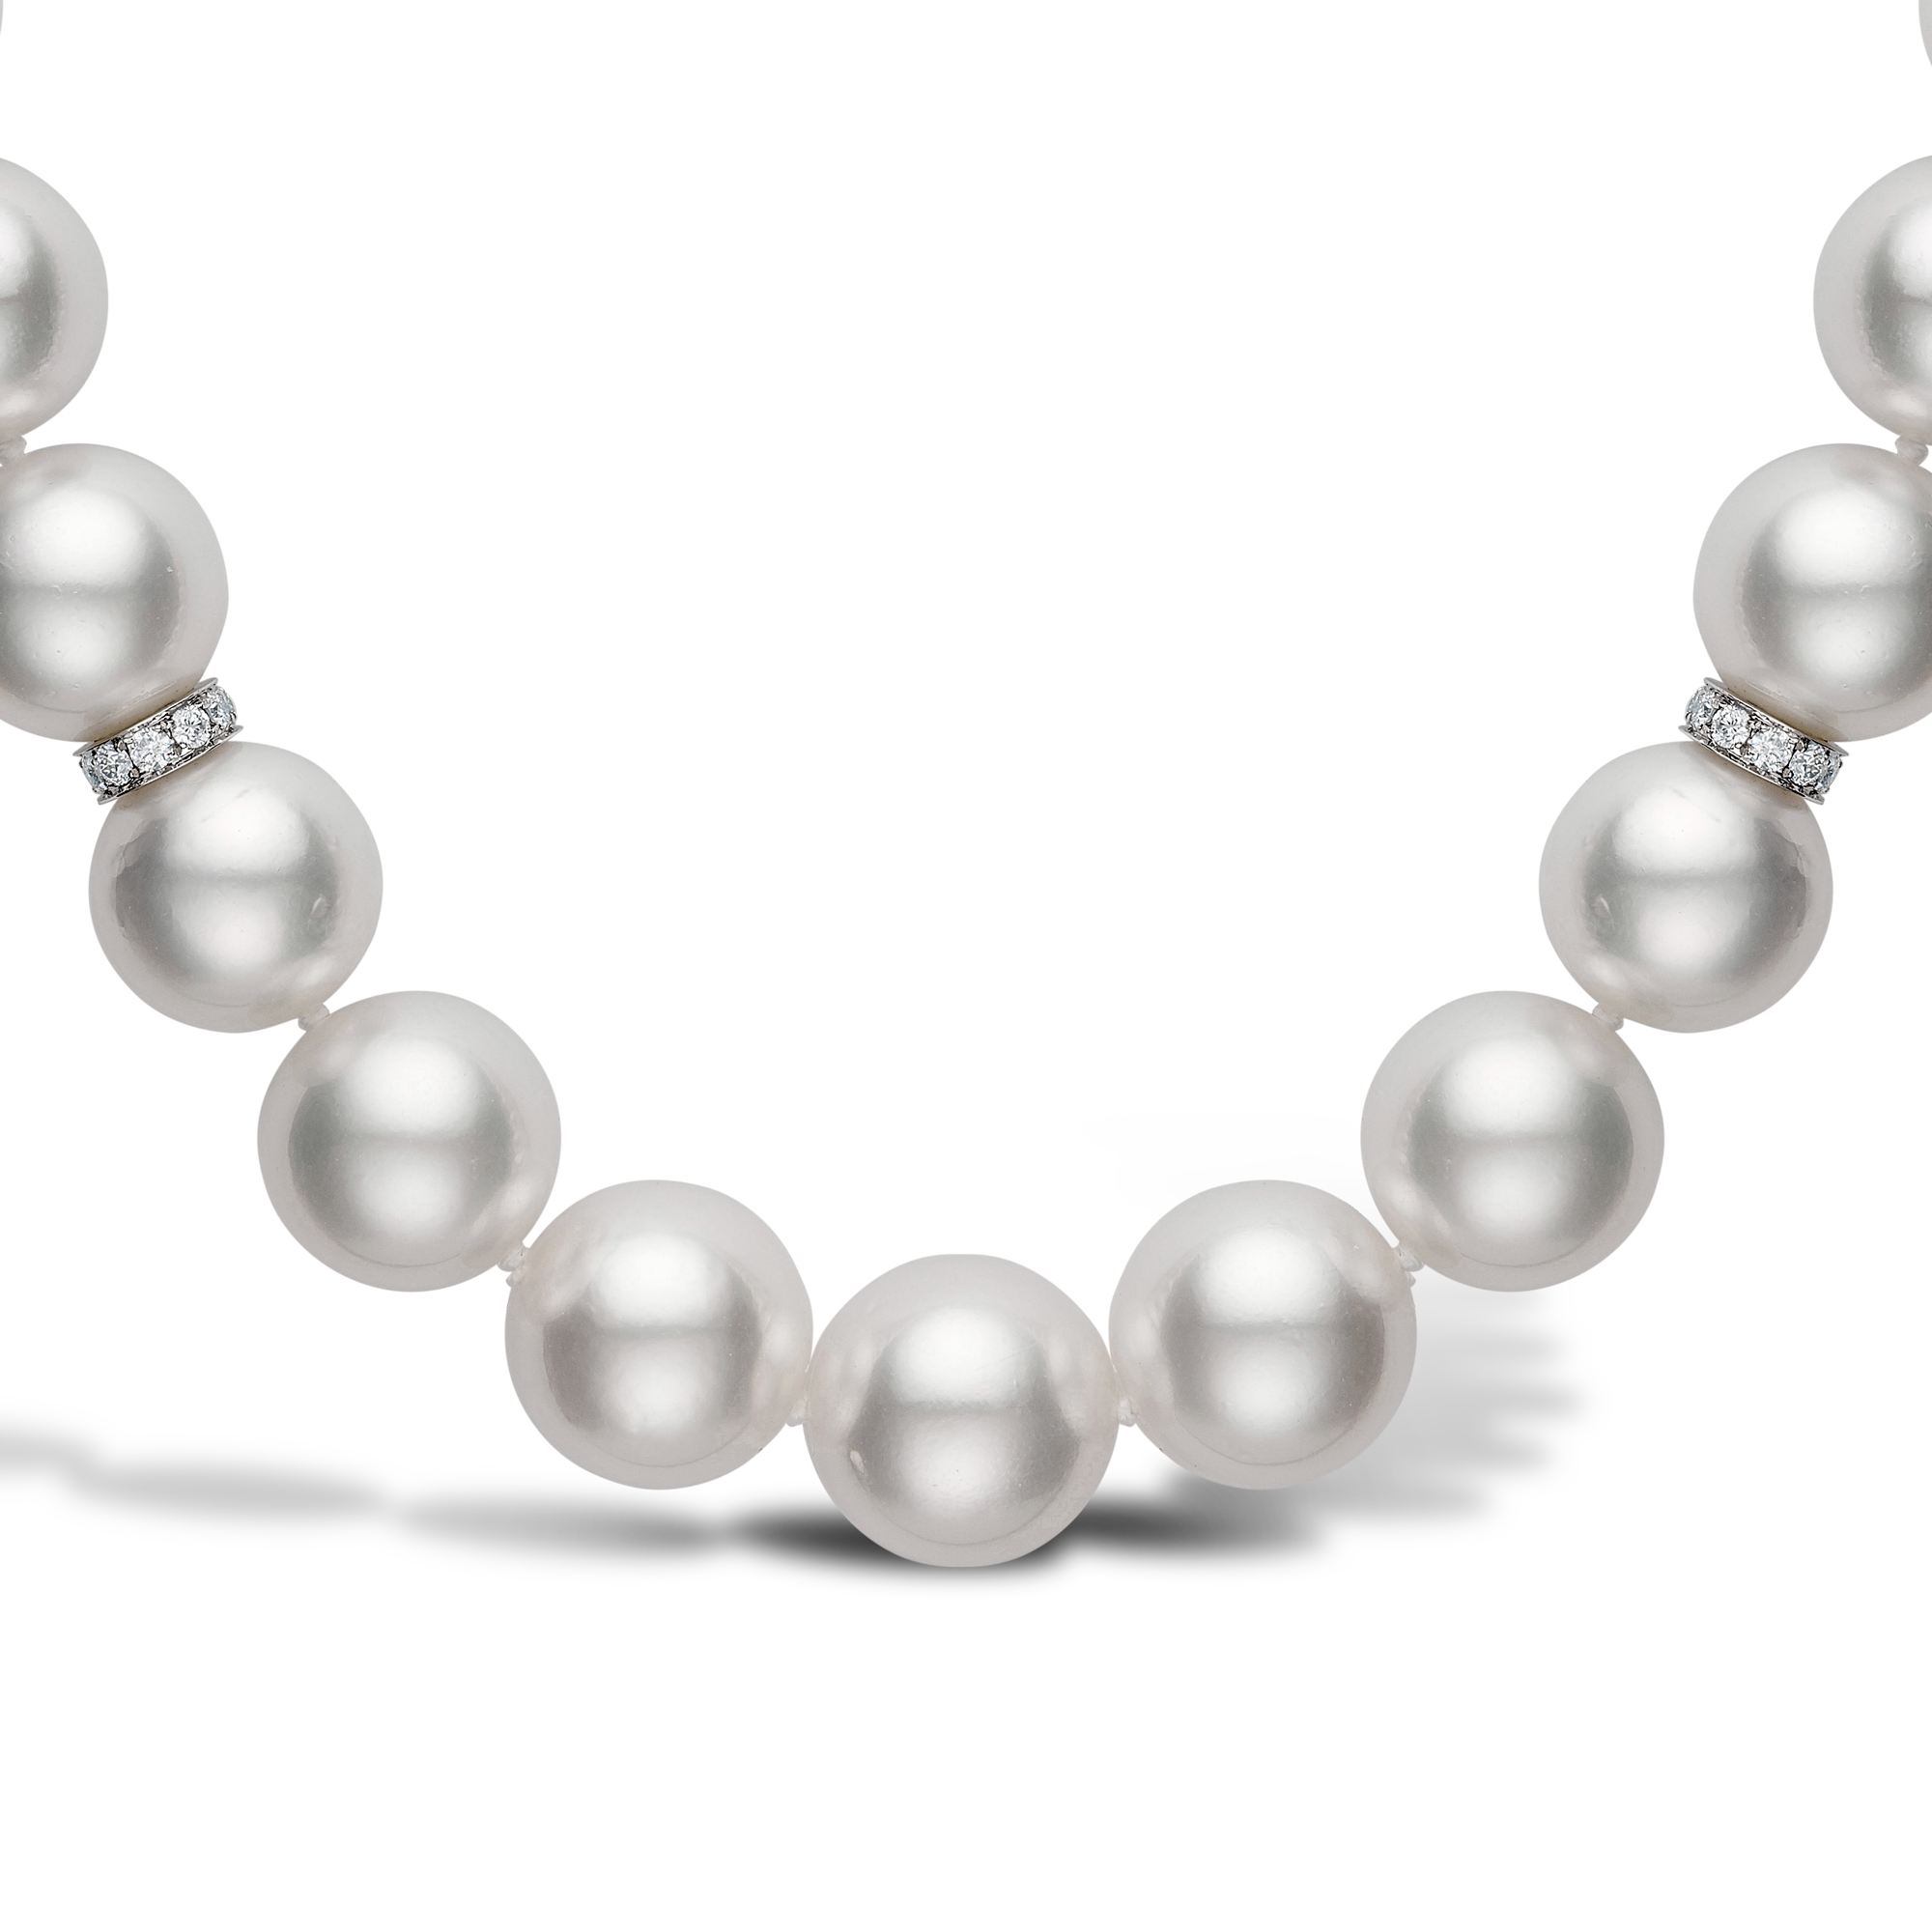 South Sea Pearl Necklace with Six Rondell Brillaint Cut Diamond Spacers 11.2mm-14.2mm_2